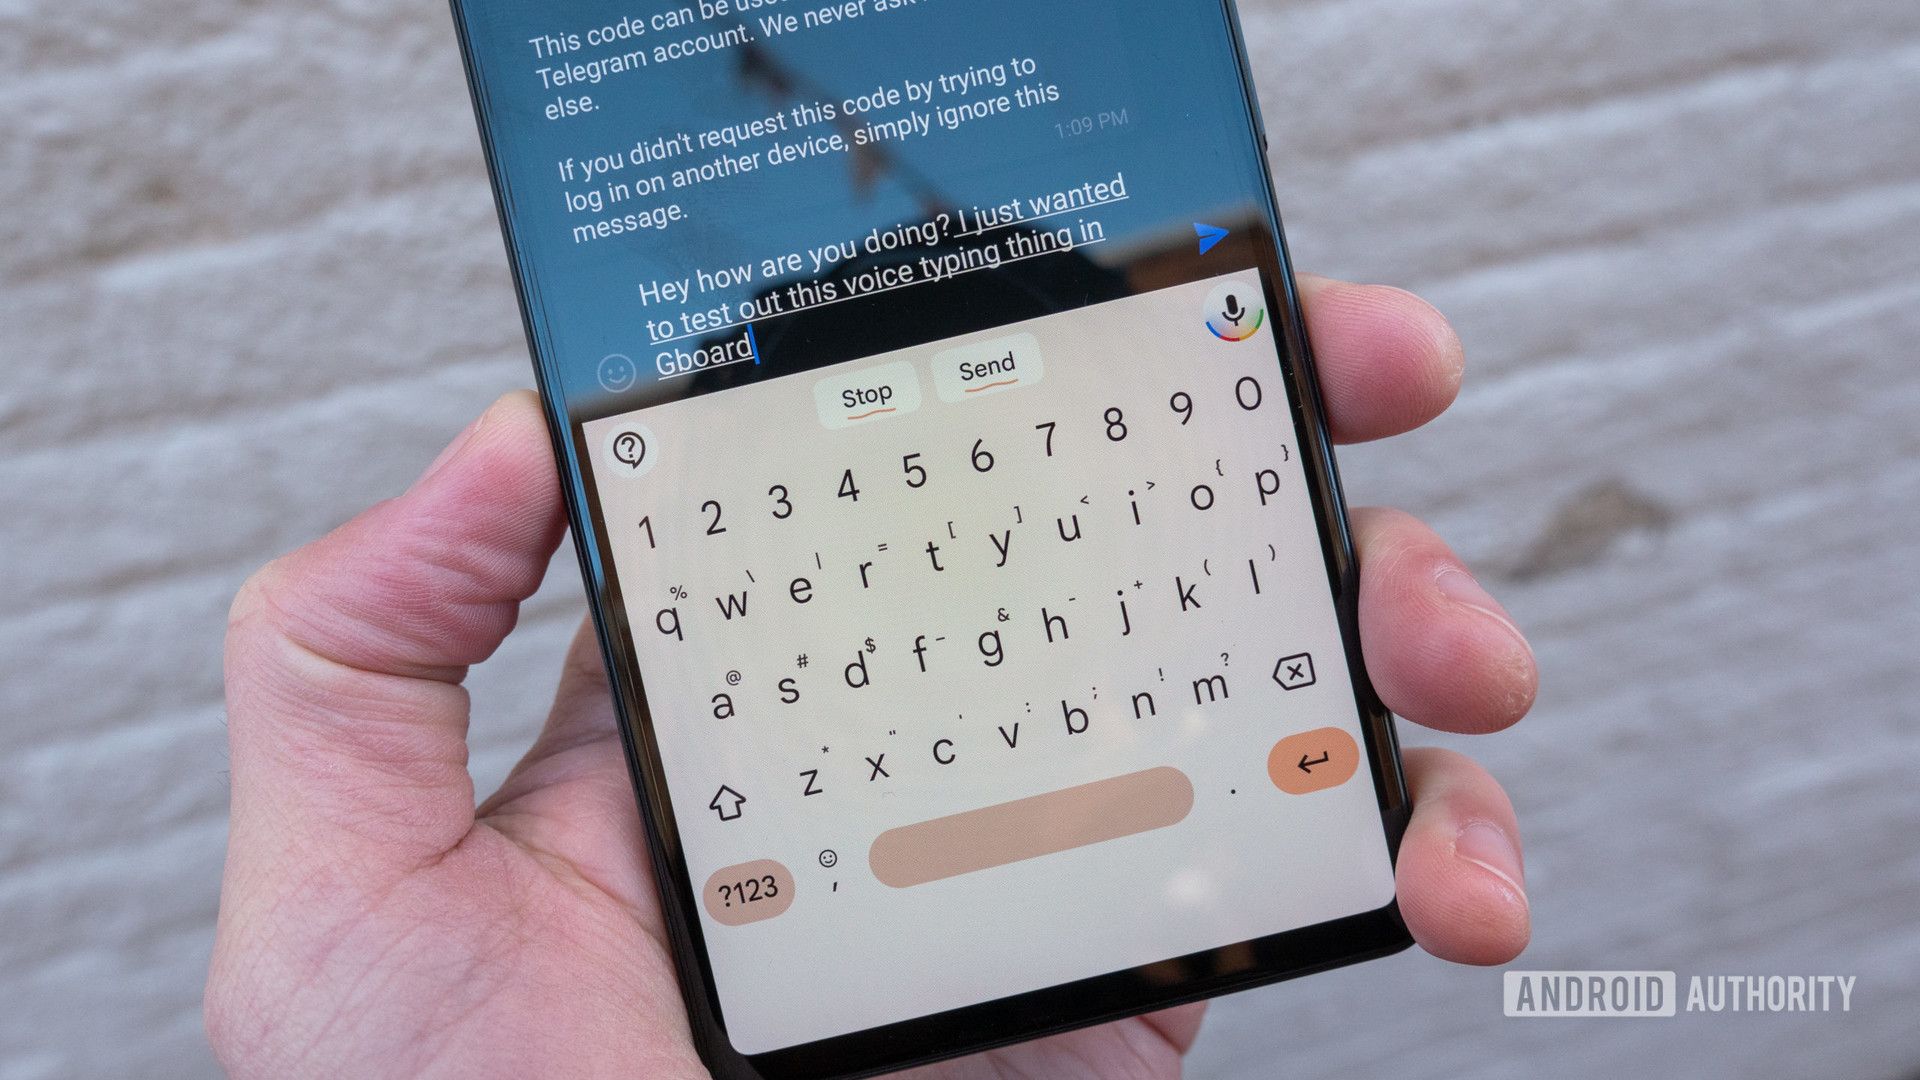 The Google Pixel 6 in hand showing gboard voice typing